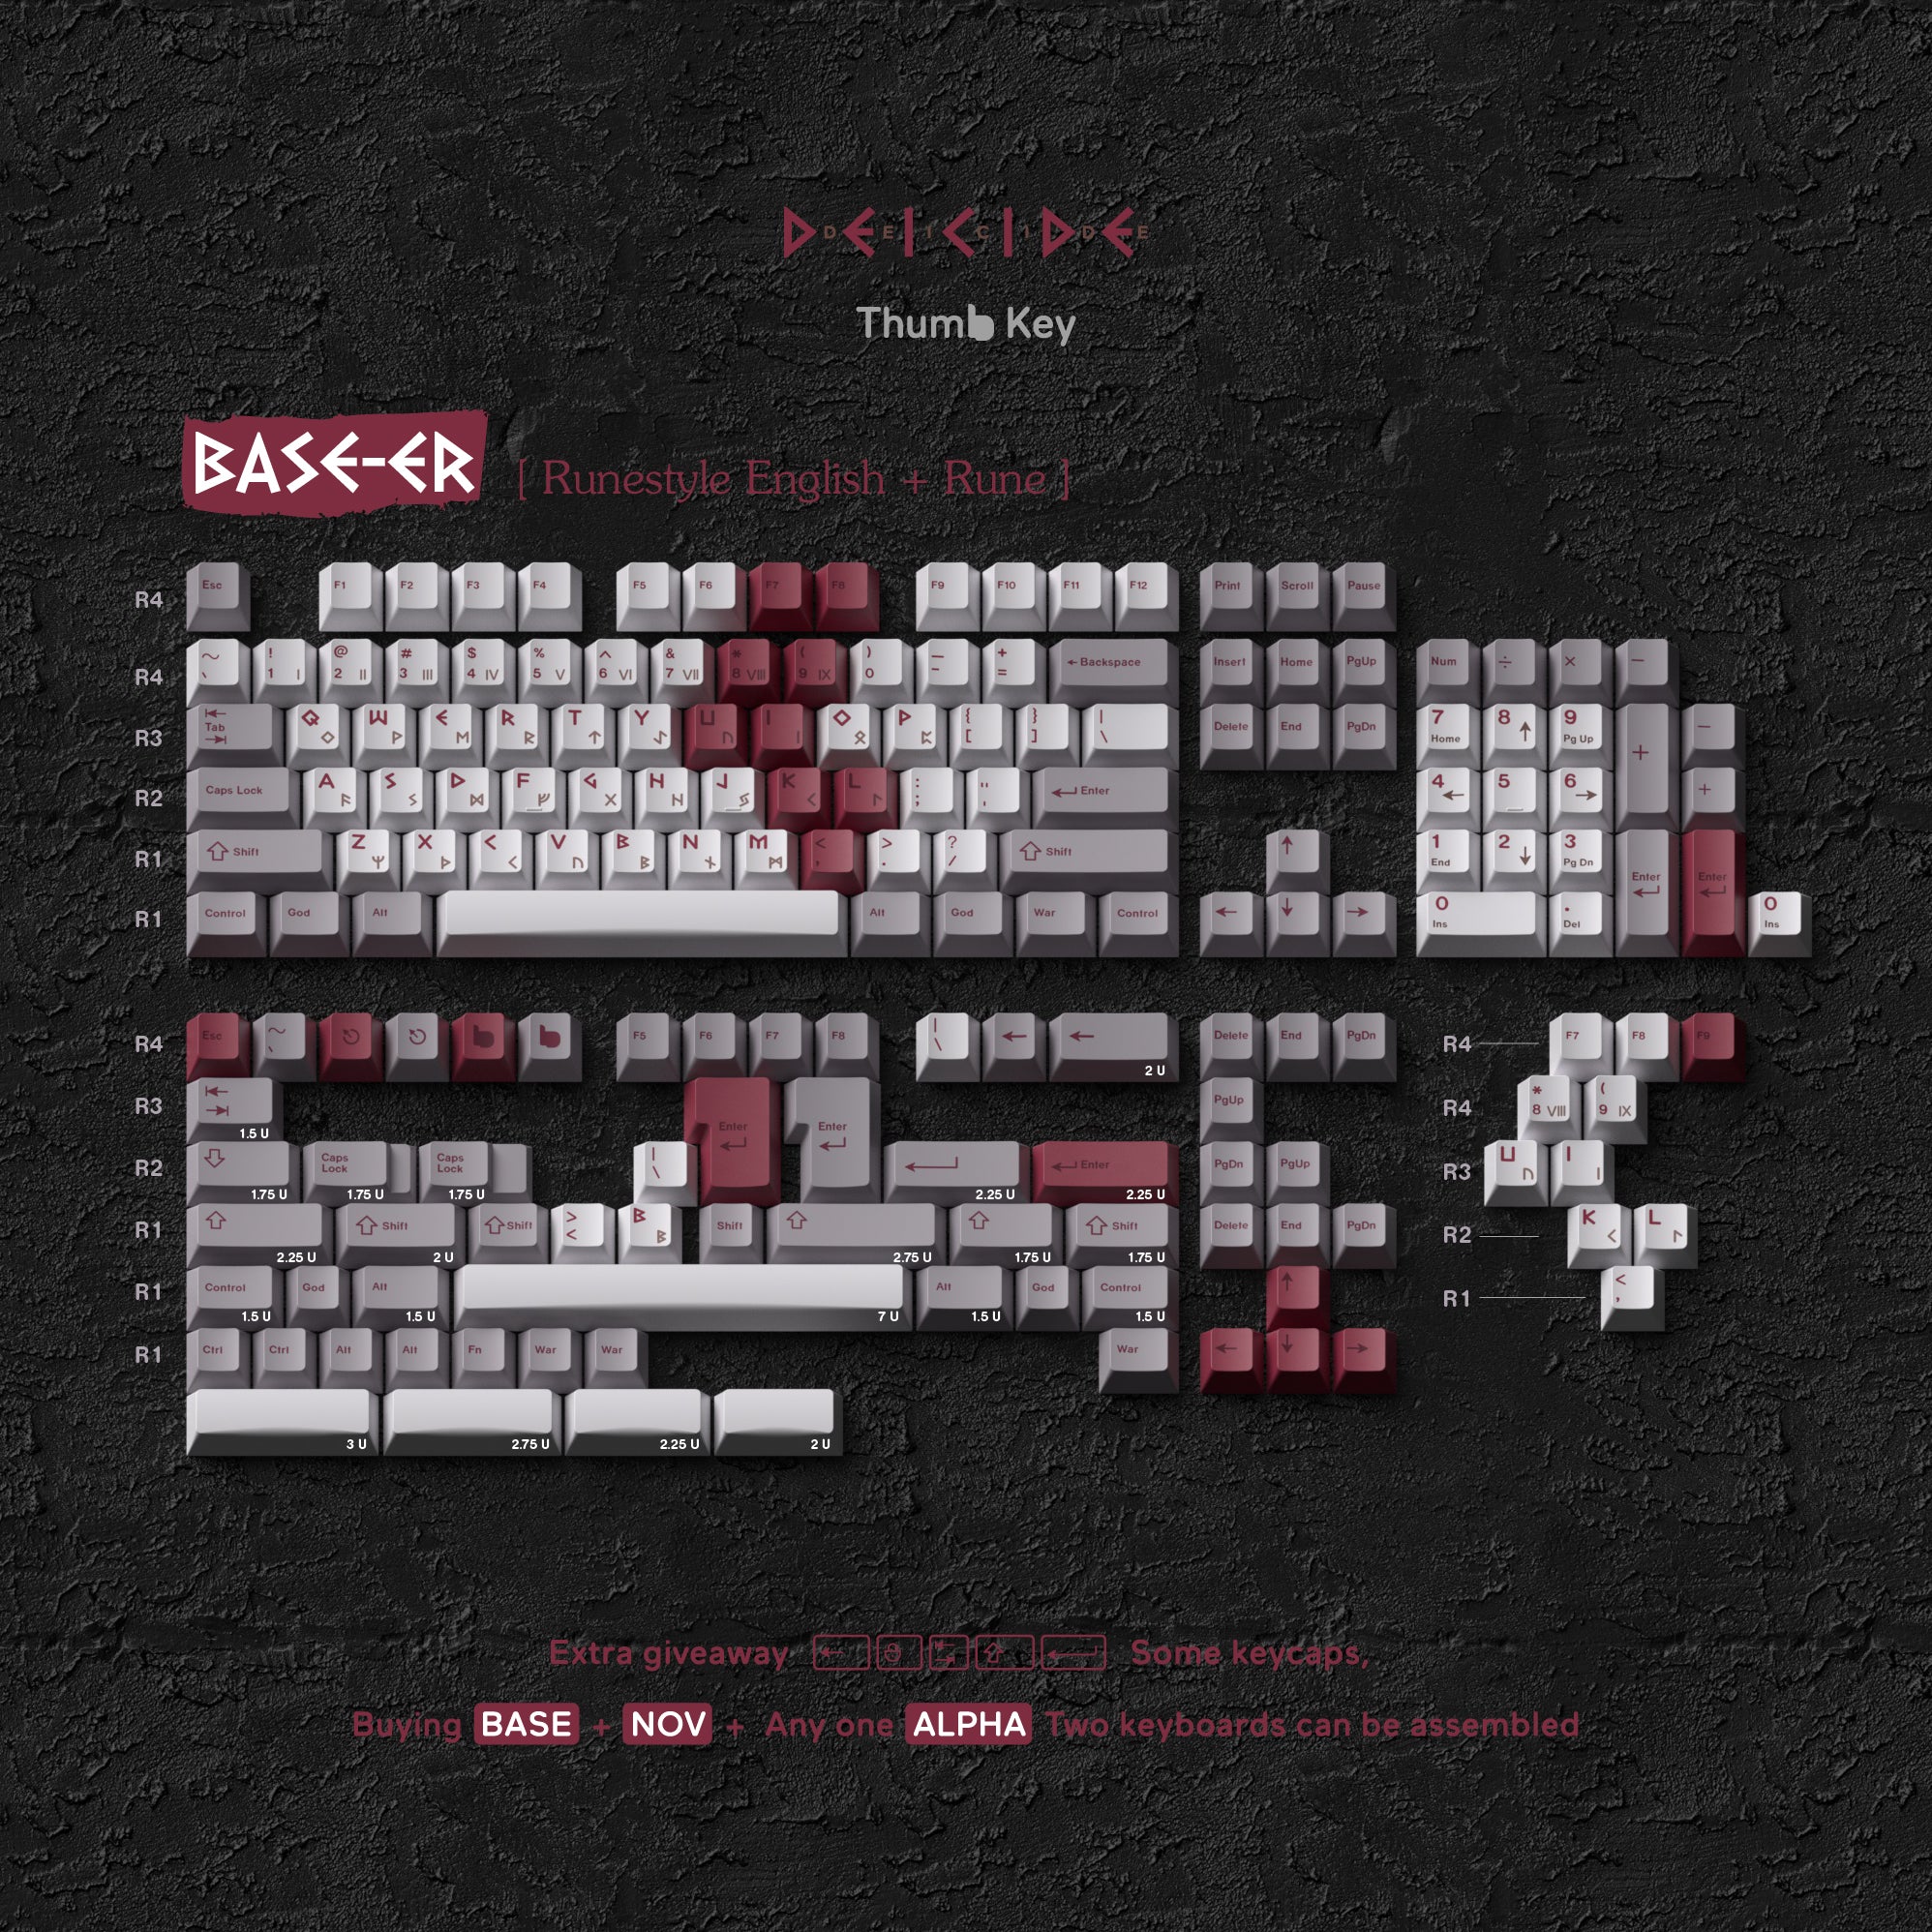 [Pre-Order] DMK Deicide Keycaps by Thumb Key - KeebsForAll